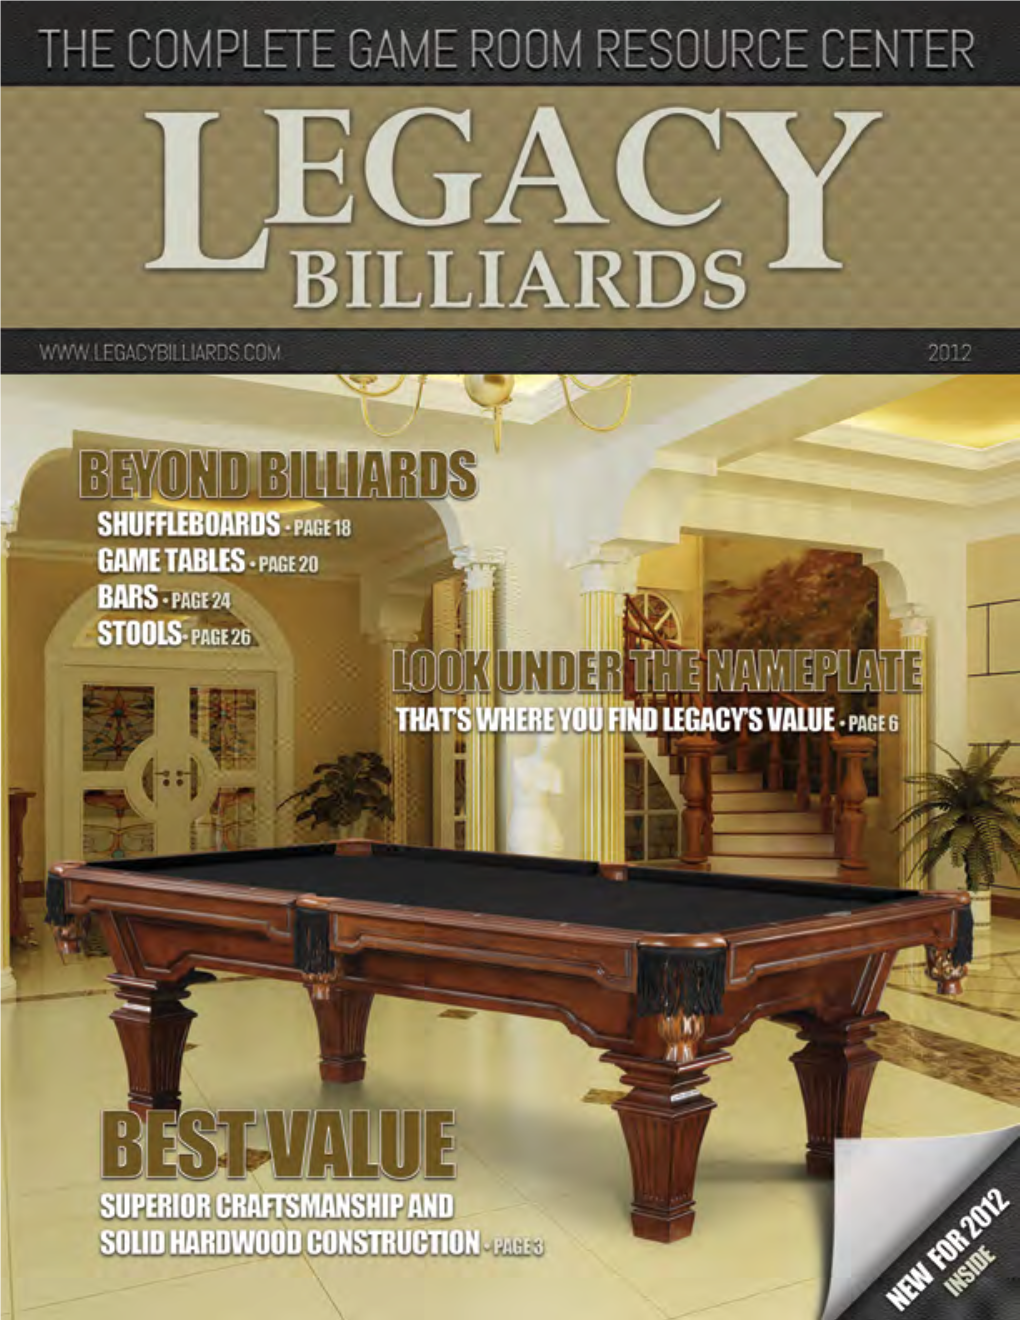 Billiard Tables 7 Things to Consider When Selecting